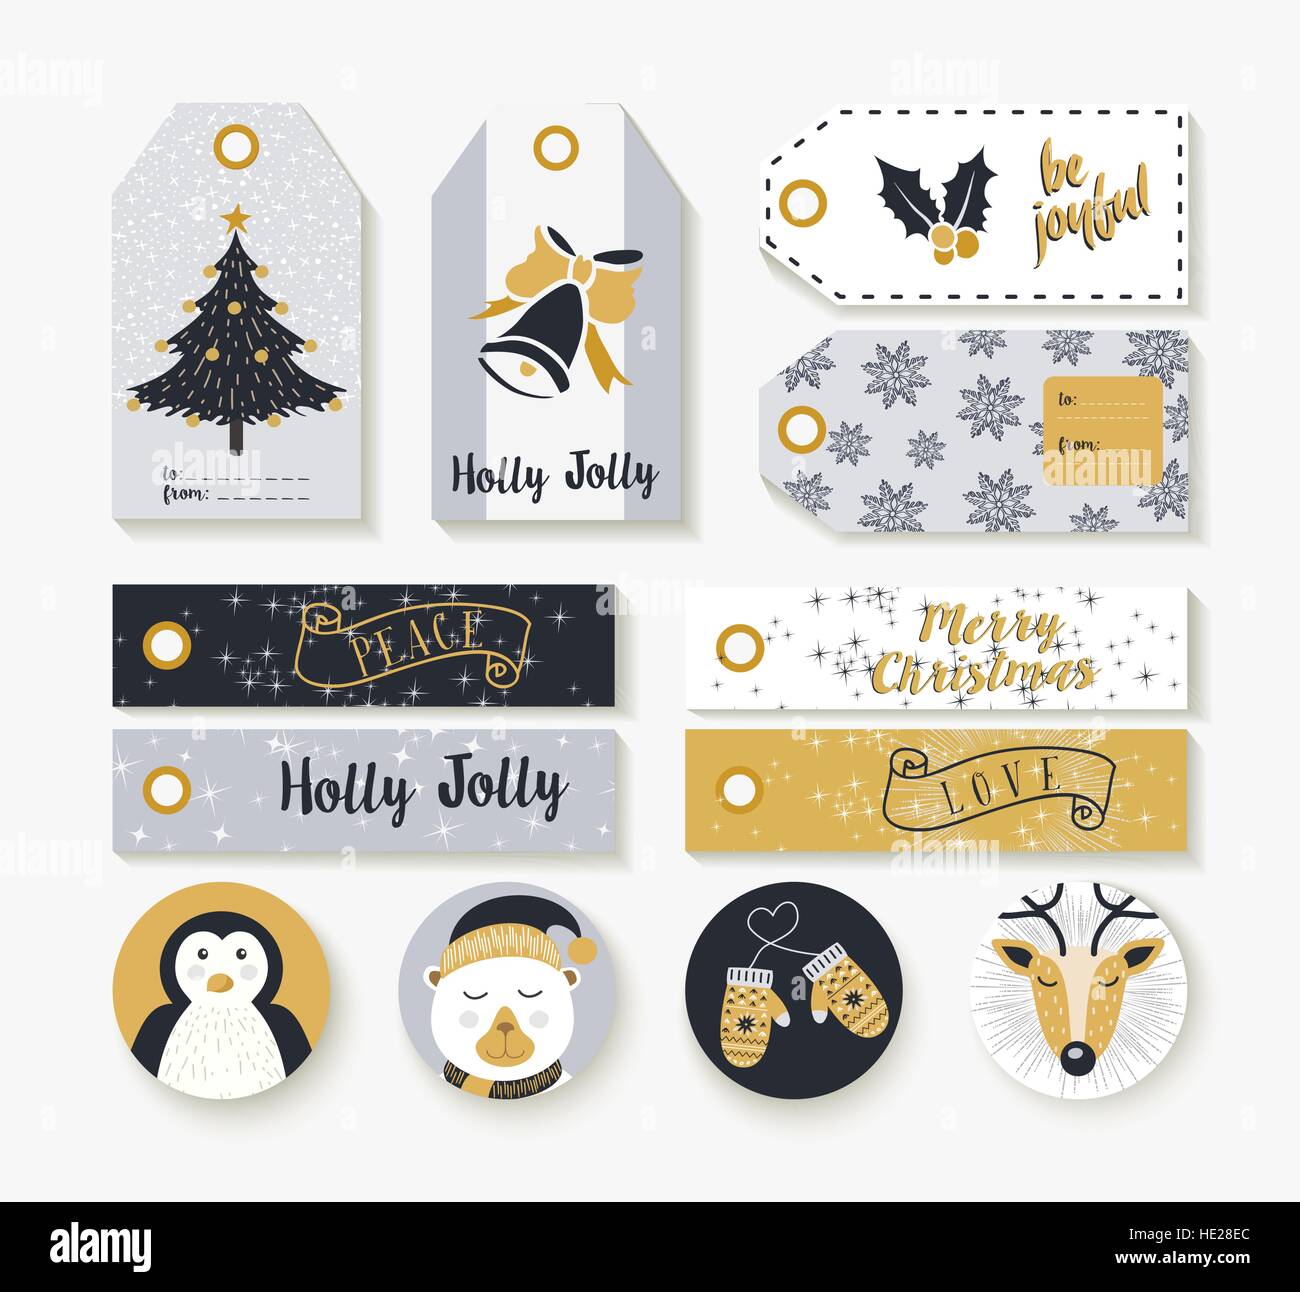 Set of vintage style christmas tags, labels and badge for holiday season with cute animal winter decoration. EPS10 vector. Stock Vector